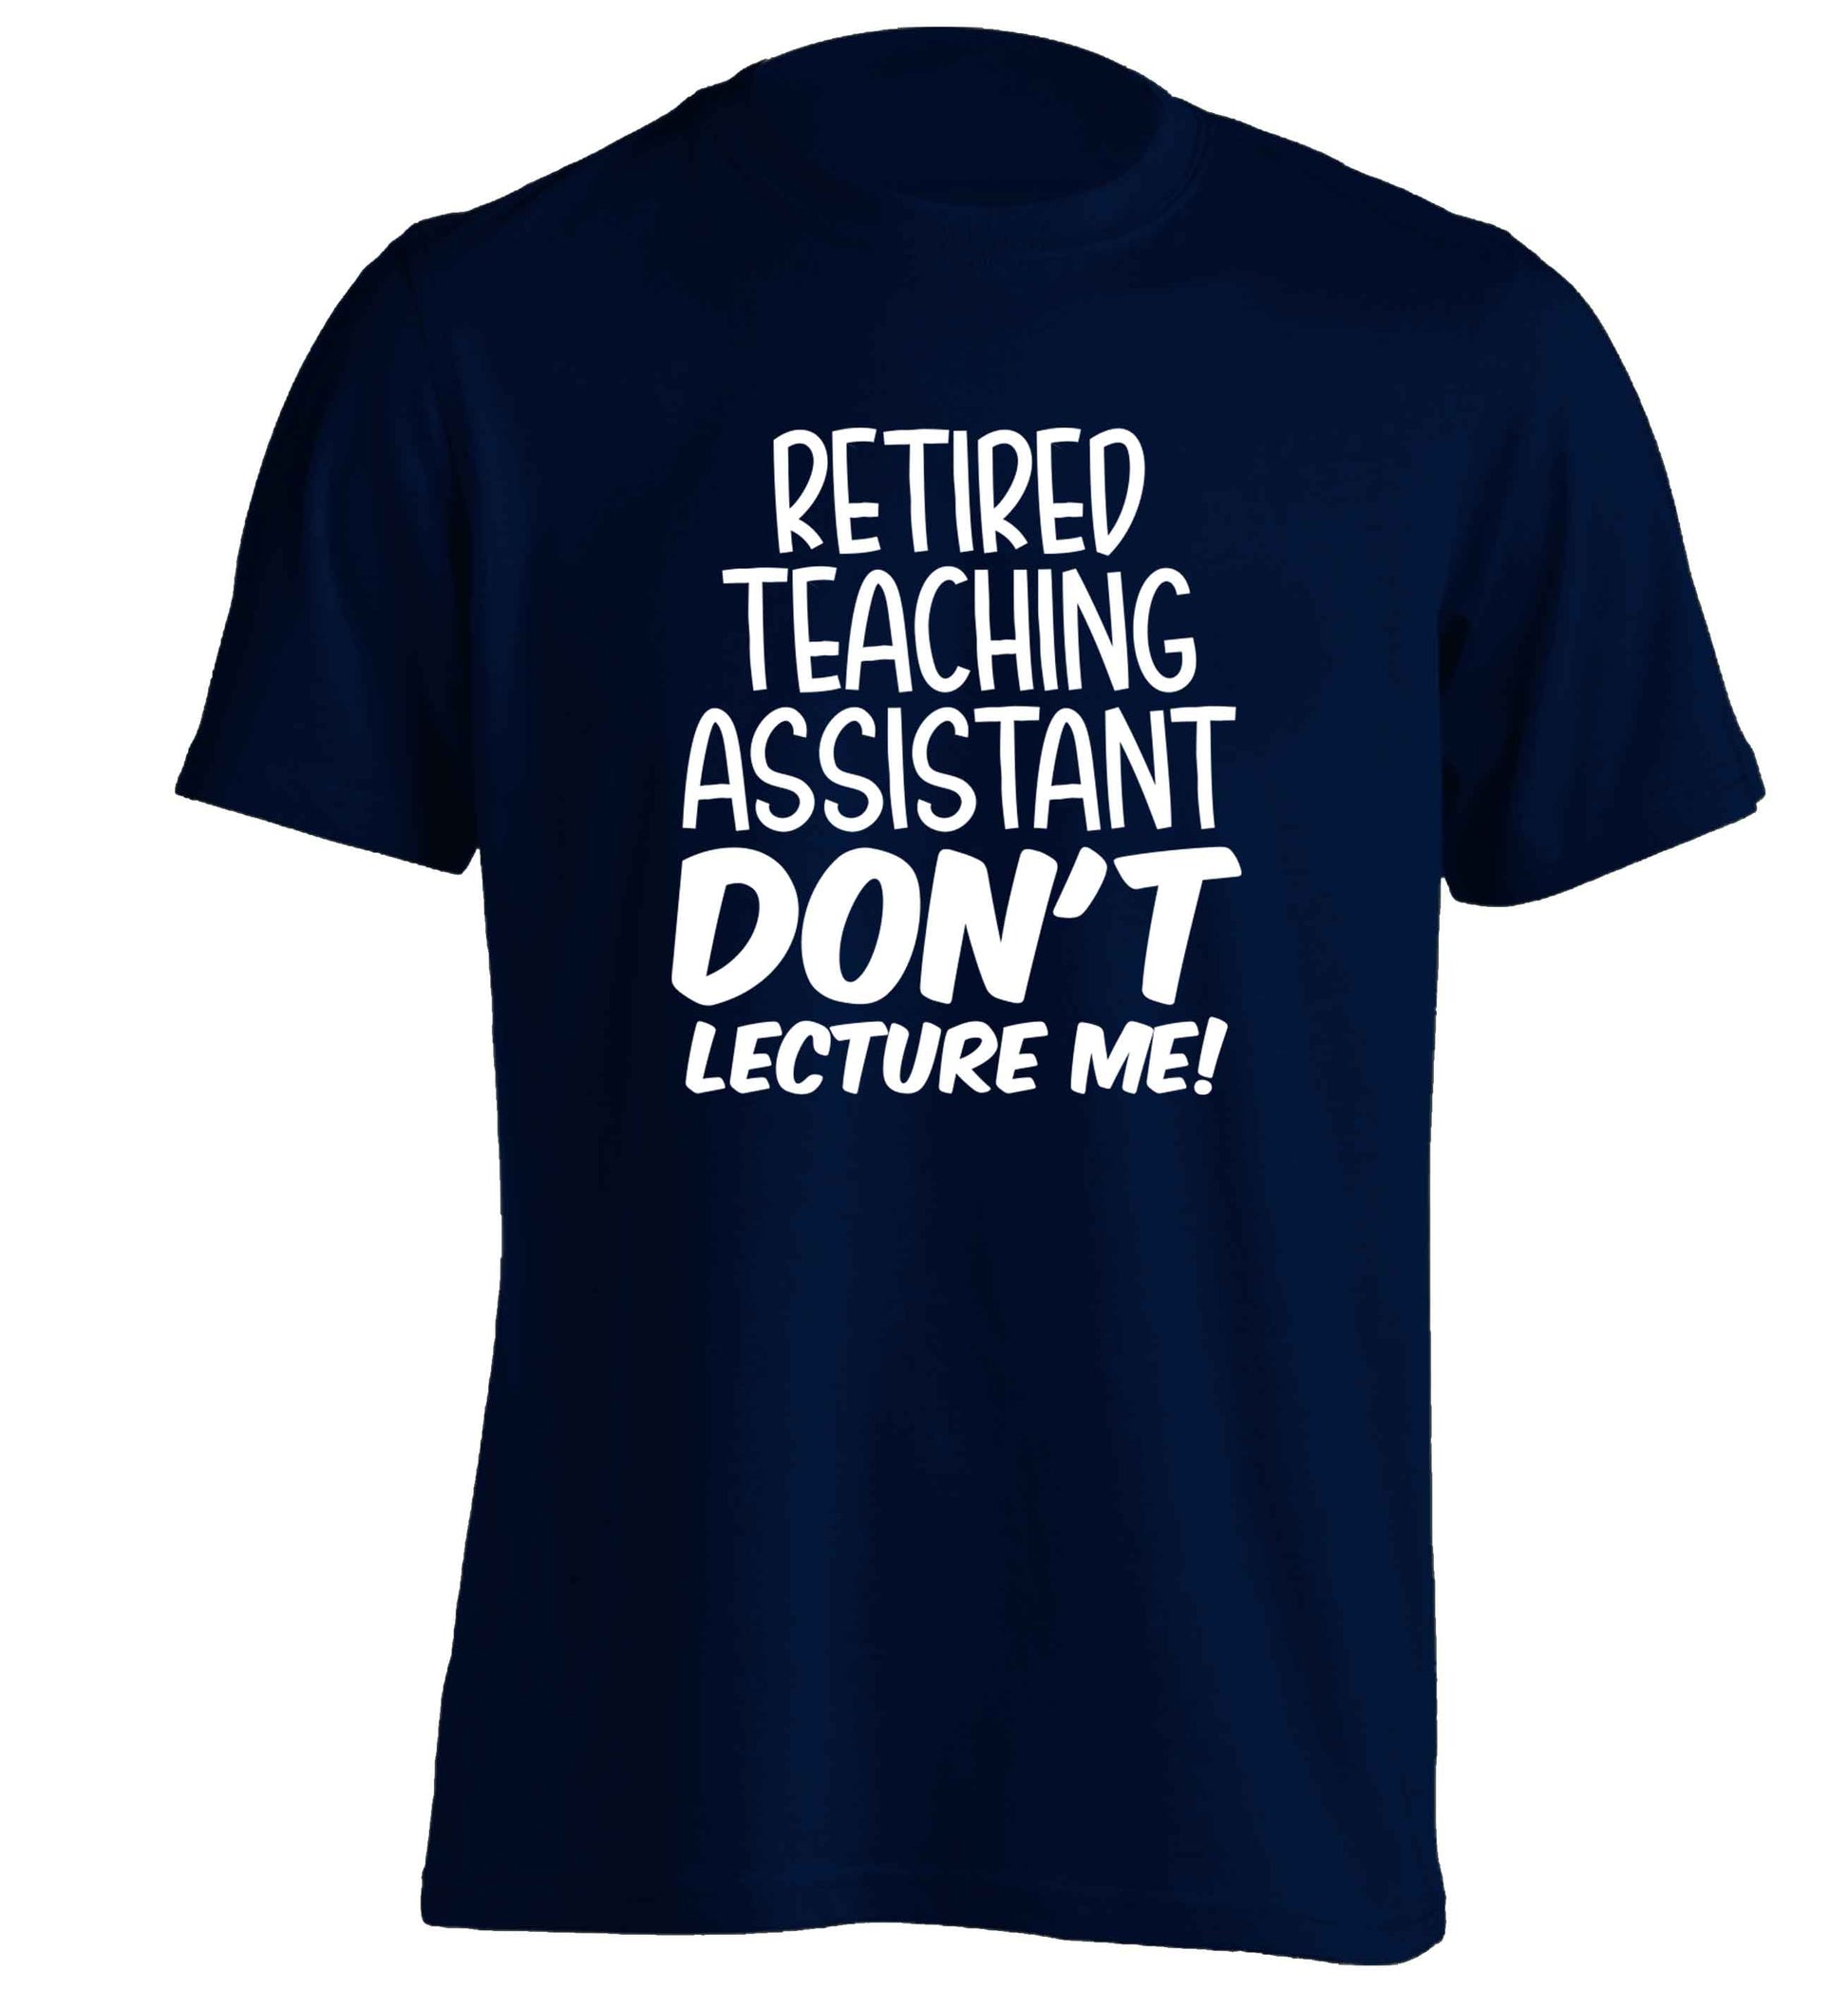 Retired teaching assistant don't lecture me adults unisex navy Tshirt 2XL